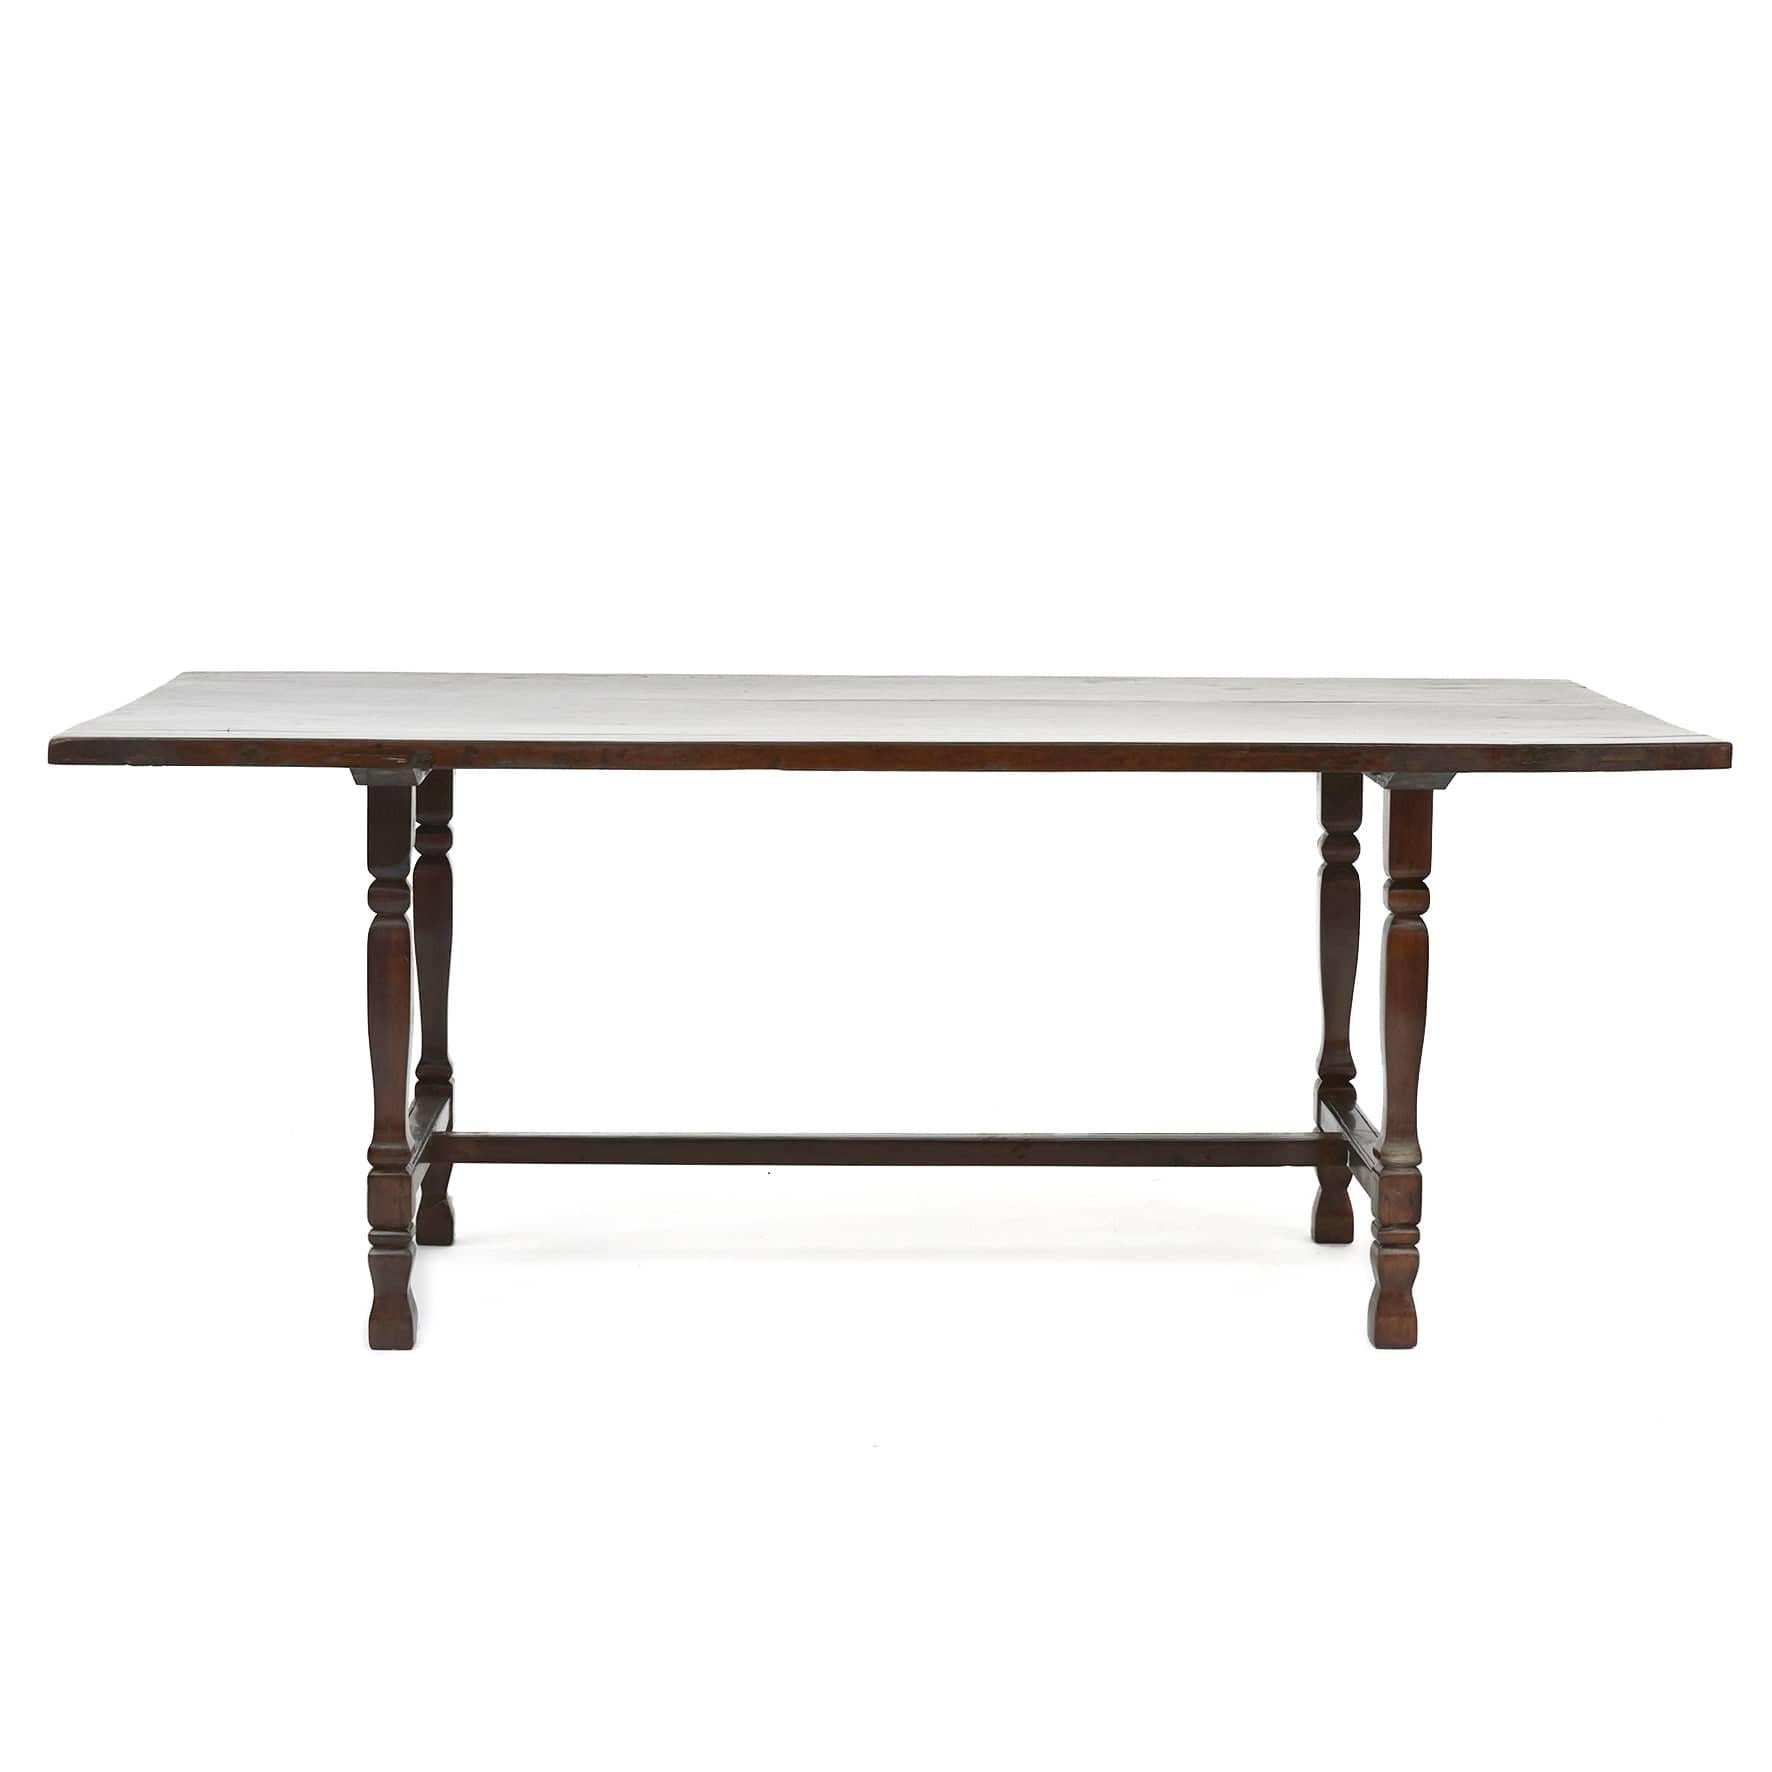 Long table made of Narra wood.
Wood with a beautiful grain pattern.
Table top is in one piece of wood.

From the Philippines 1860 - 1880.
The national tree of the Philippines, is today protected.

The Philippines was a Spanish colony 1565 - 1898,